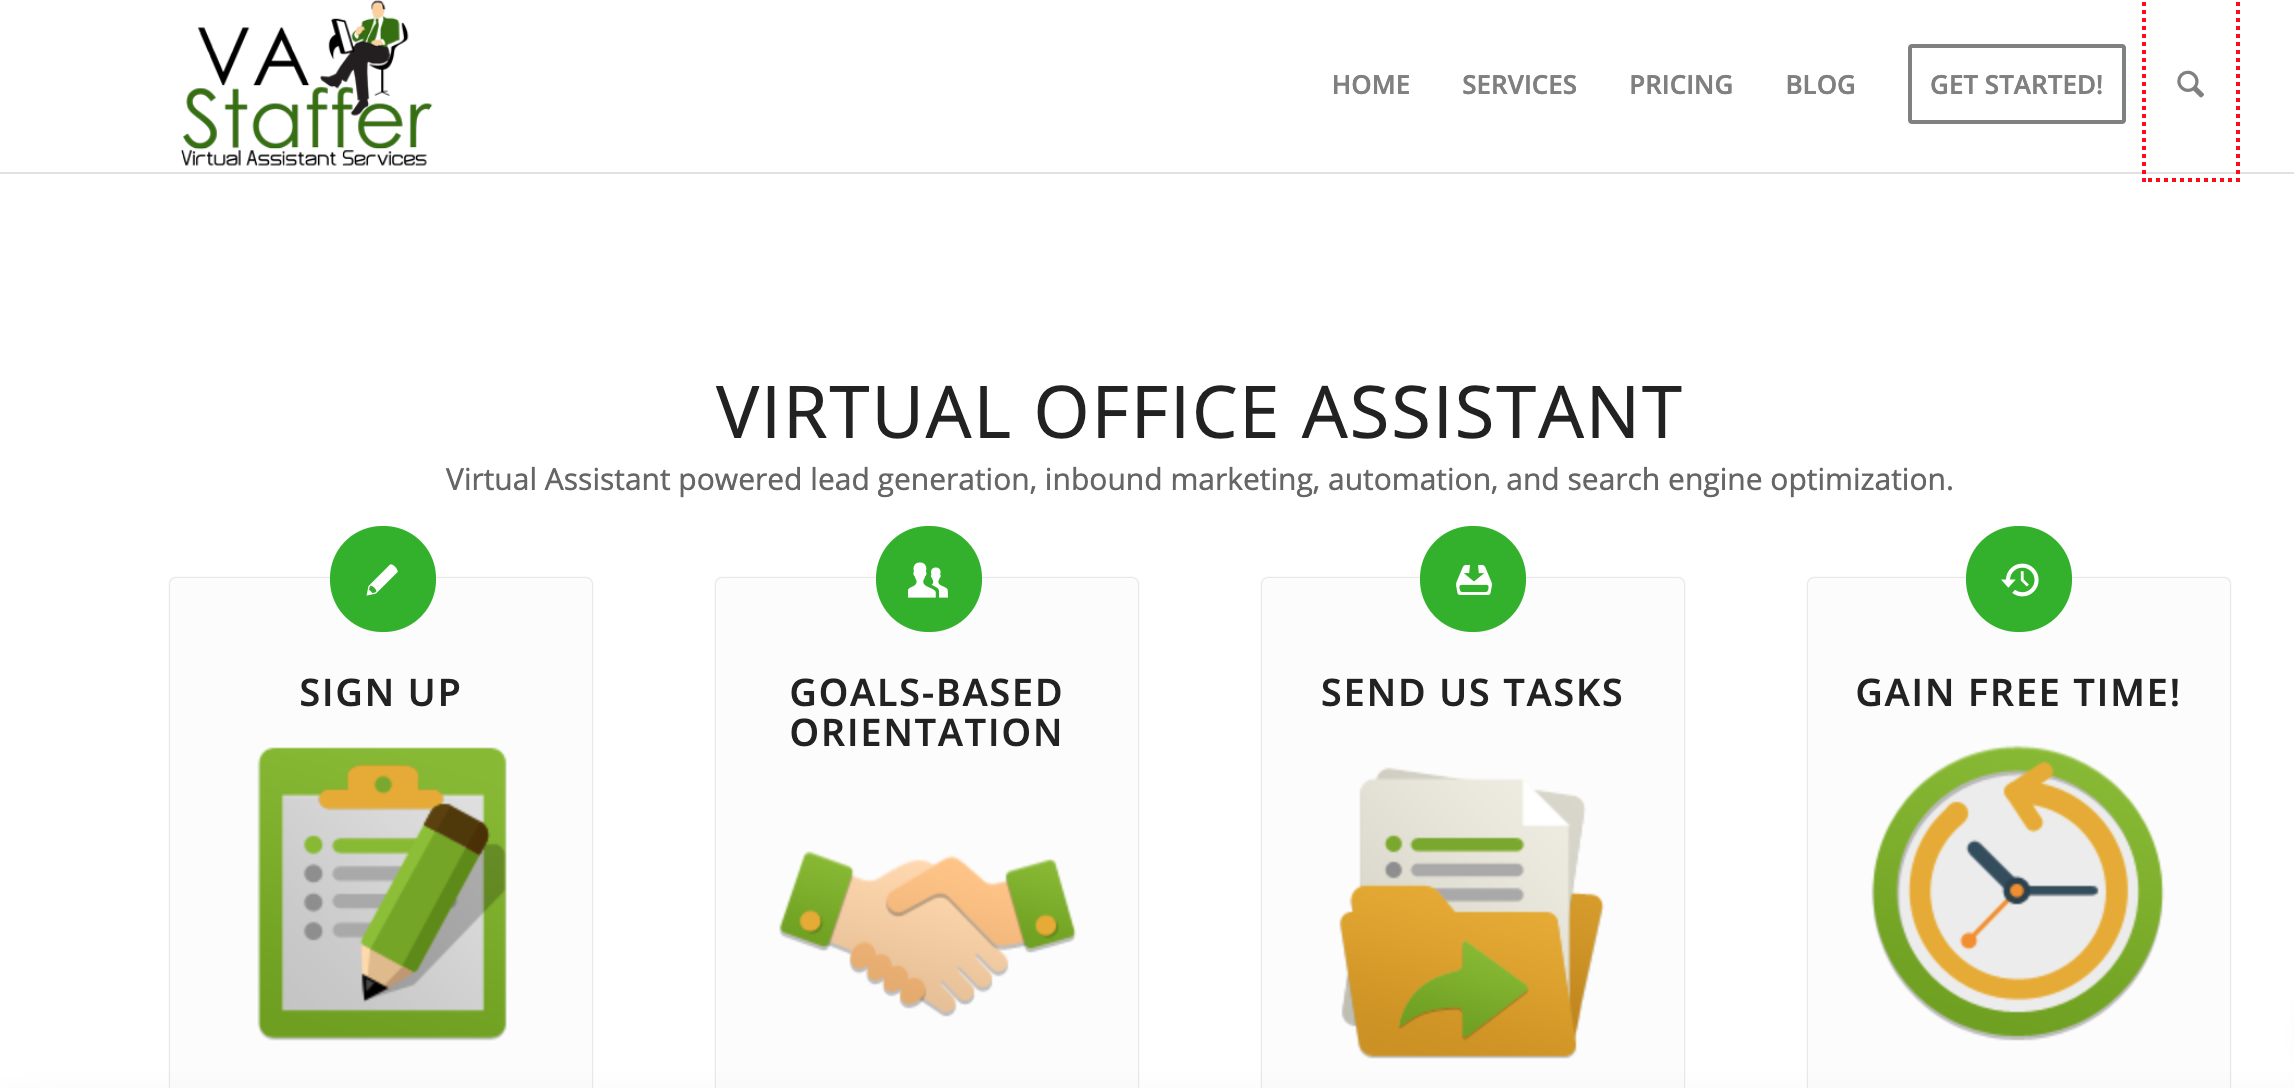 VA Staffer homepage, with title Virtual Office Assistant